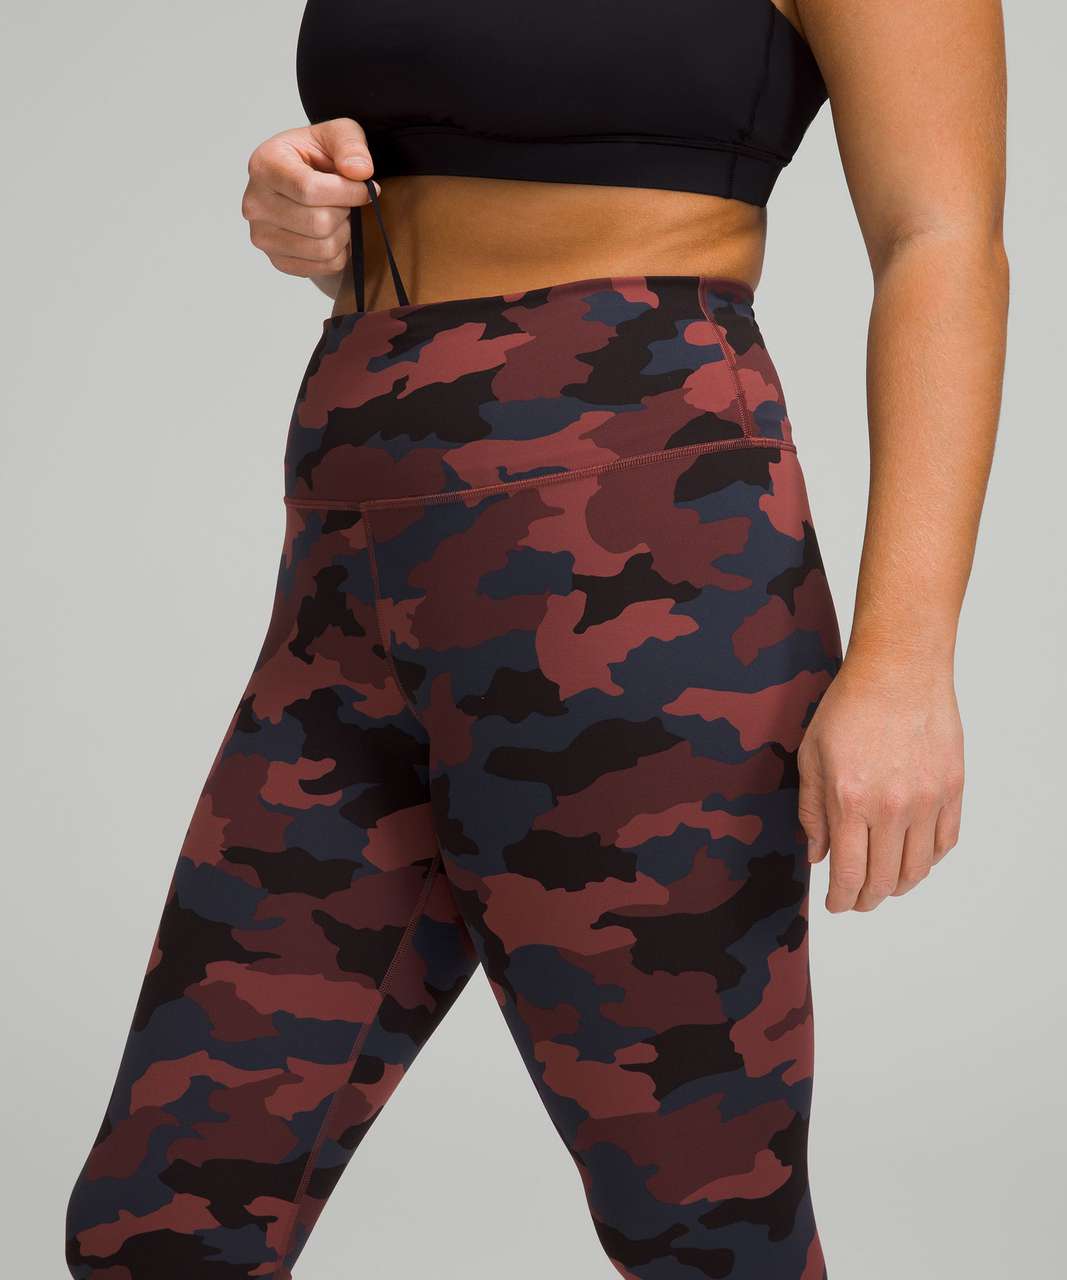 NWT- Lululemon Wunder Train 25” in Heritage 365 Camo Smoky Red